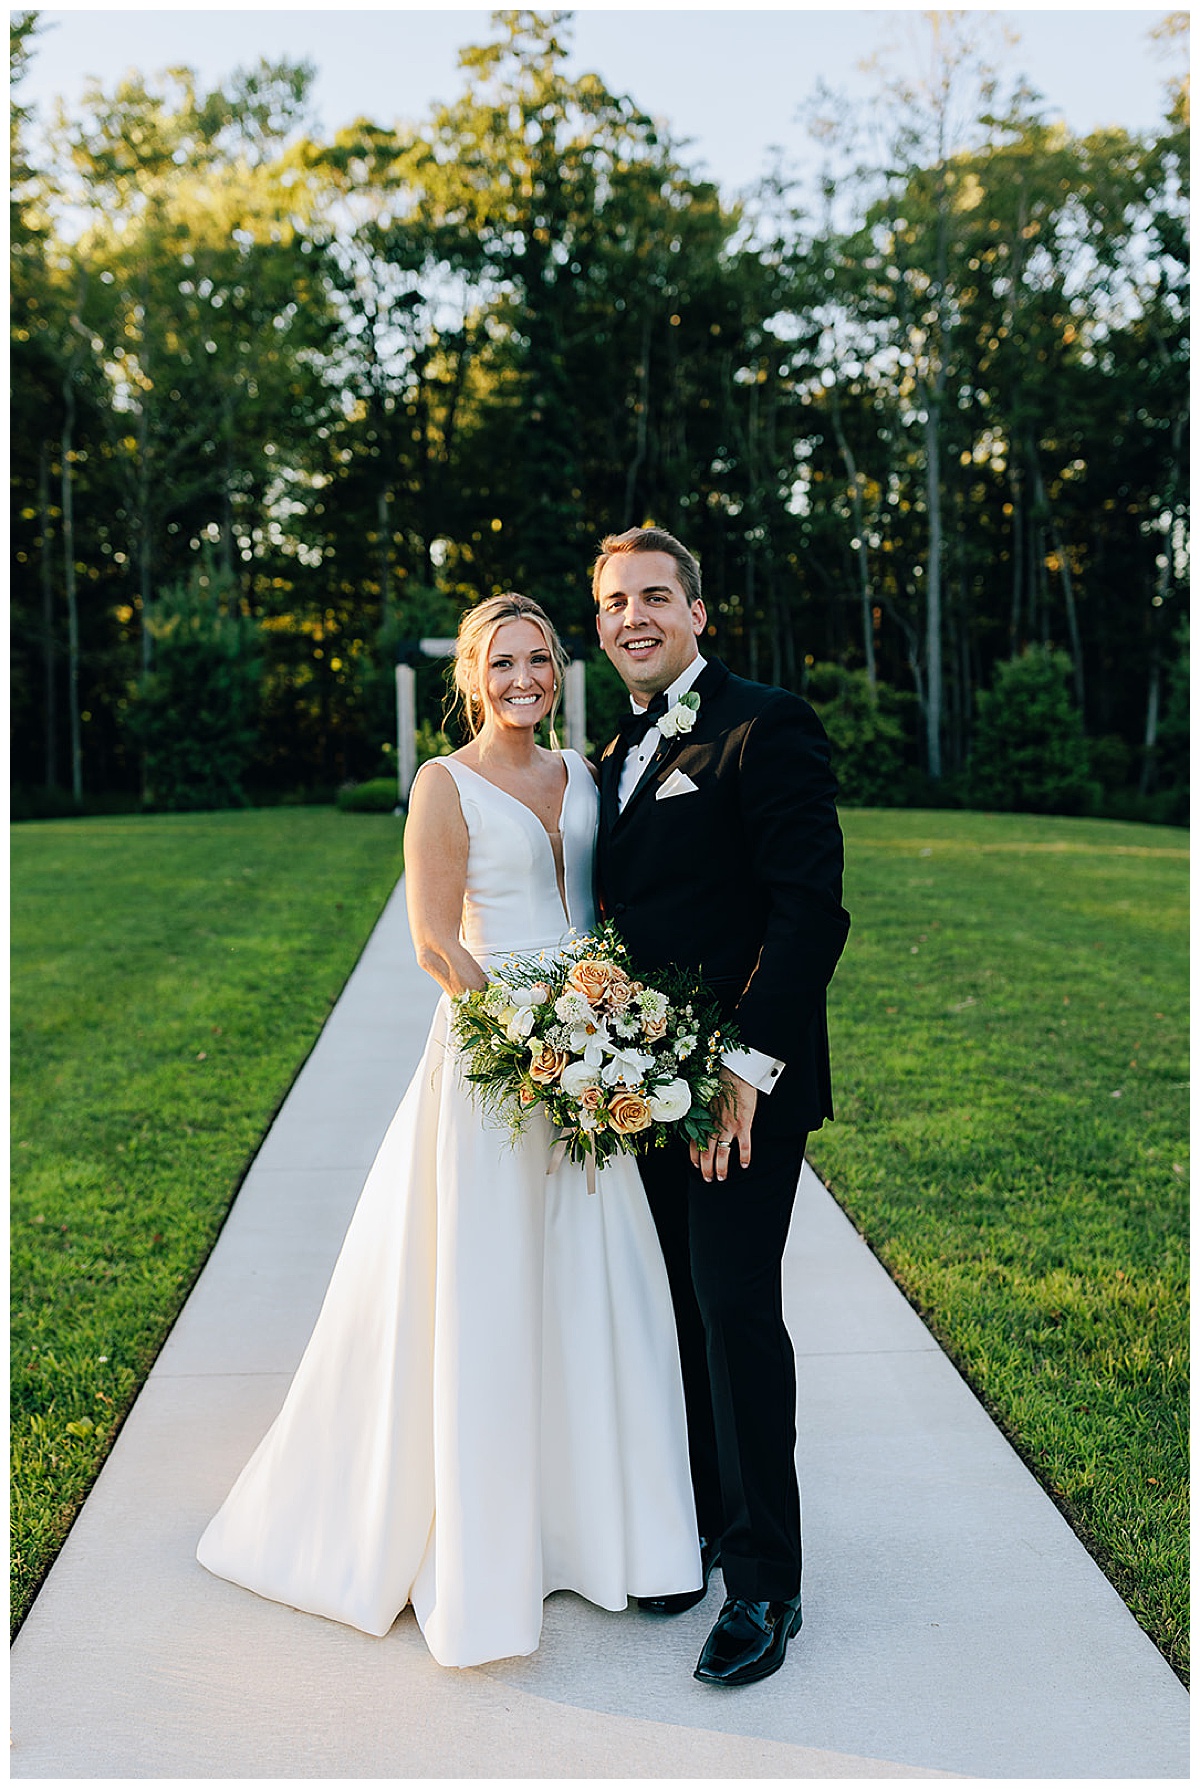 All smiles for bride and groom by Kayla Bouren Photography